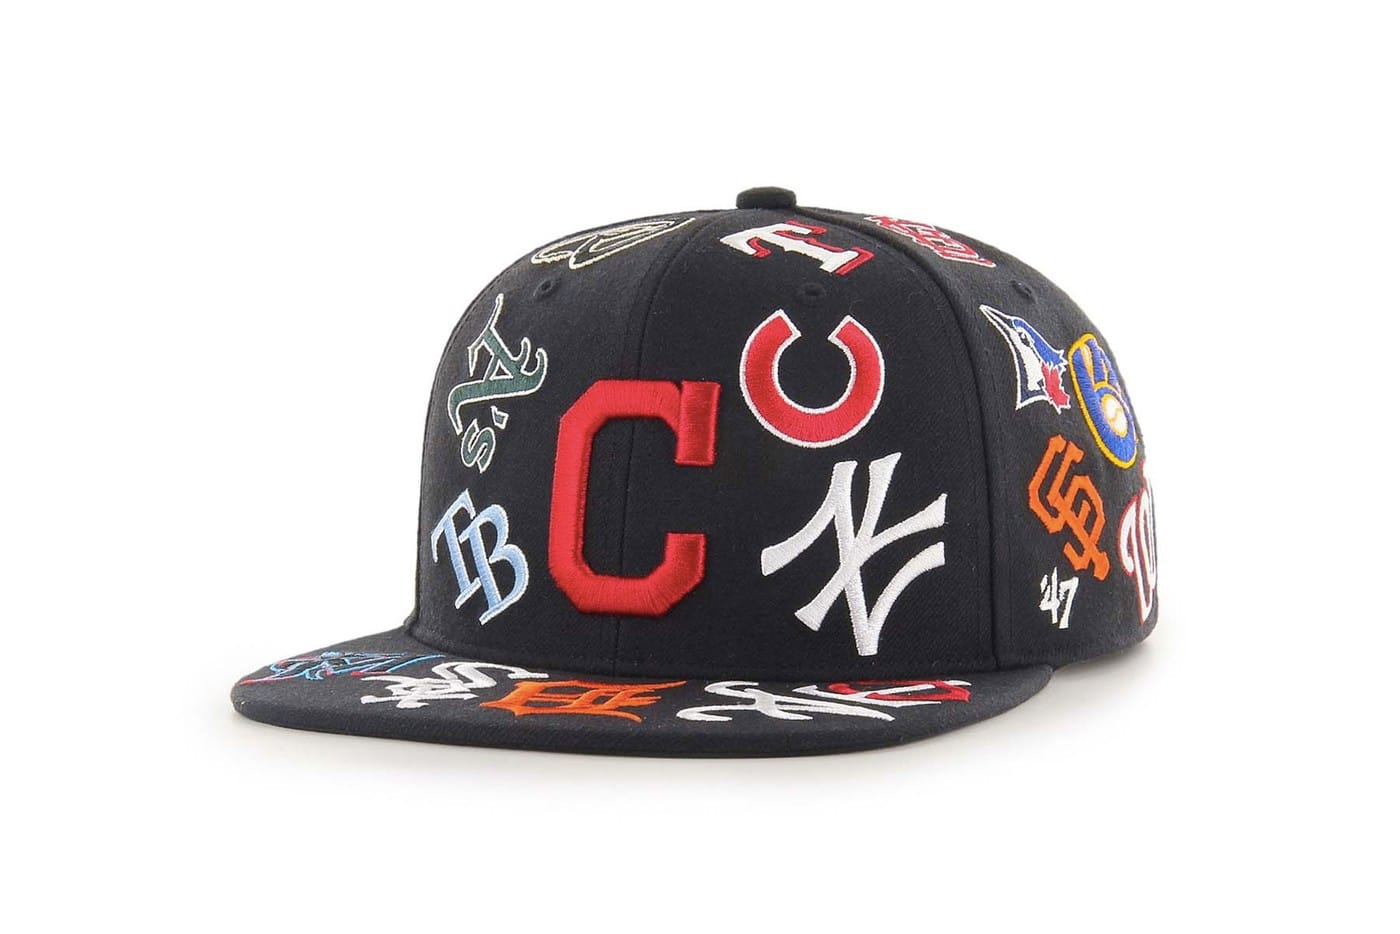 MLB x '47 2019 All Star Game Cap Release | HYPEBEAST